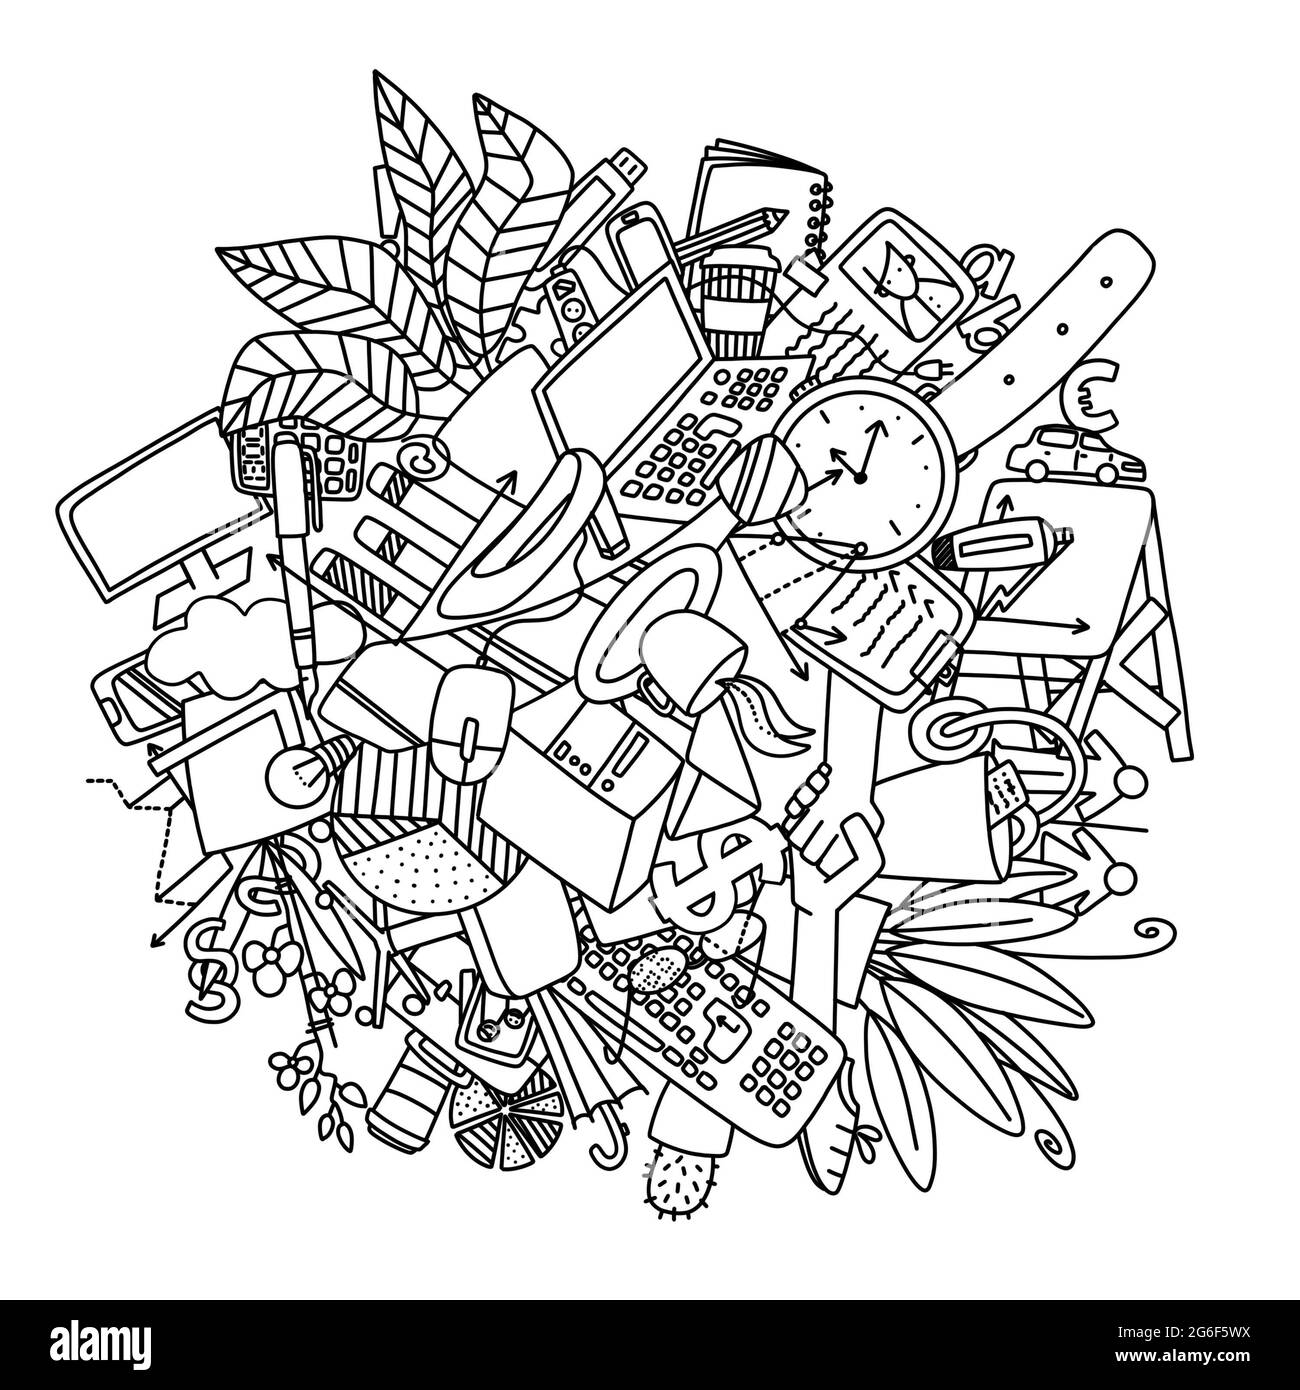 Business office theme. Doodle with a lot of office equipment. Stock Photo